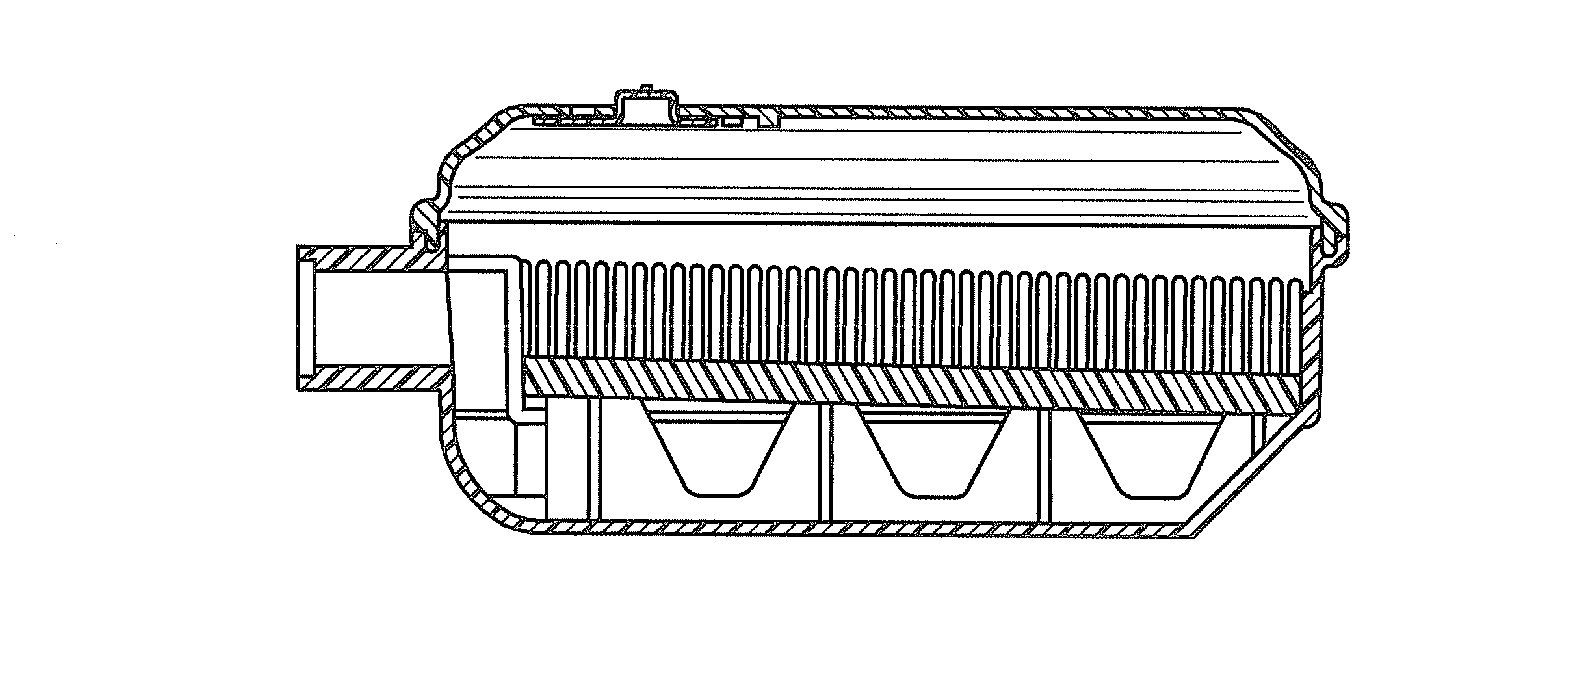 Filter assembly with adjustable inlet opening